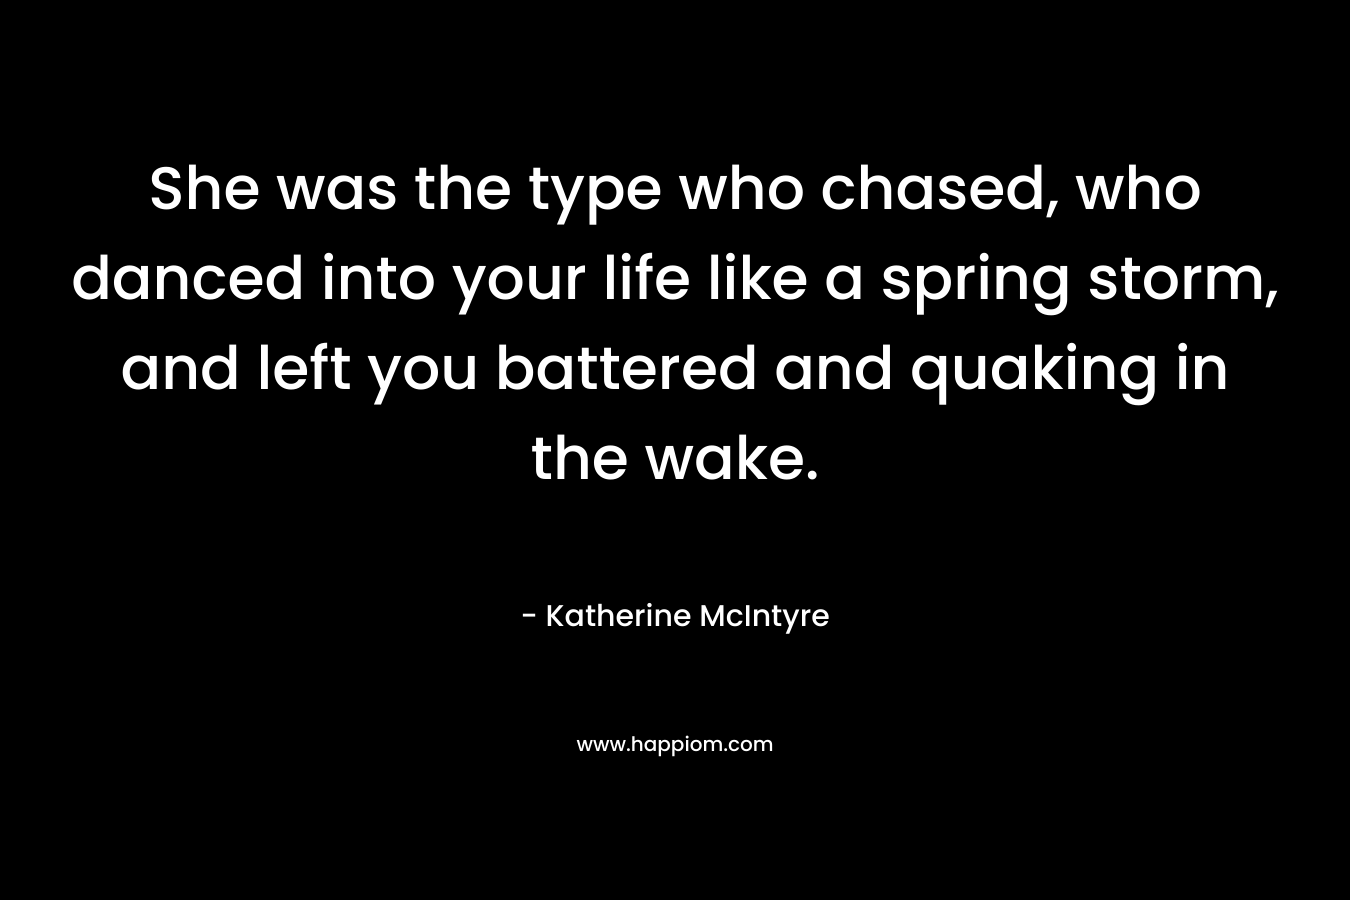 She was the type who chased, who danced into your life like a spring storm, and left you battered and quaking in the wake. – Katherine McIntyre